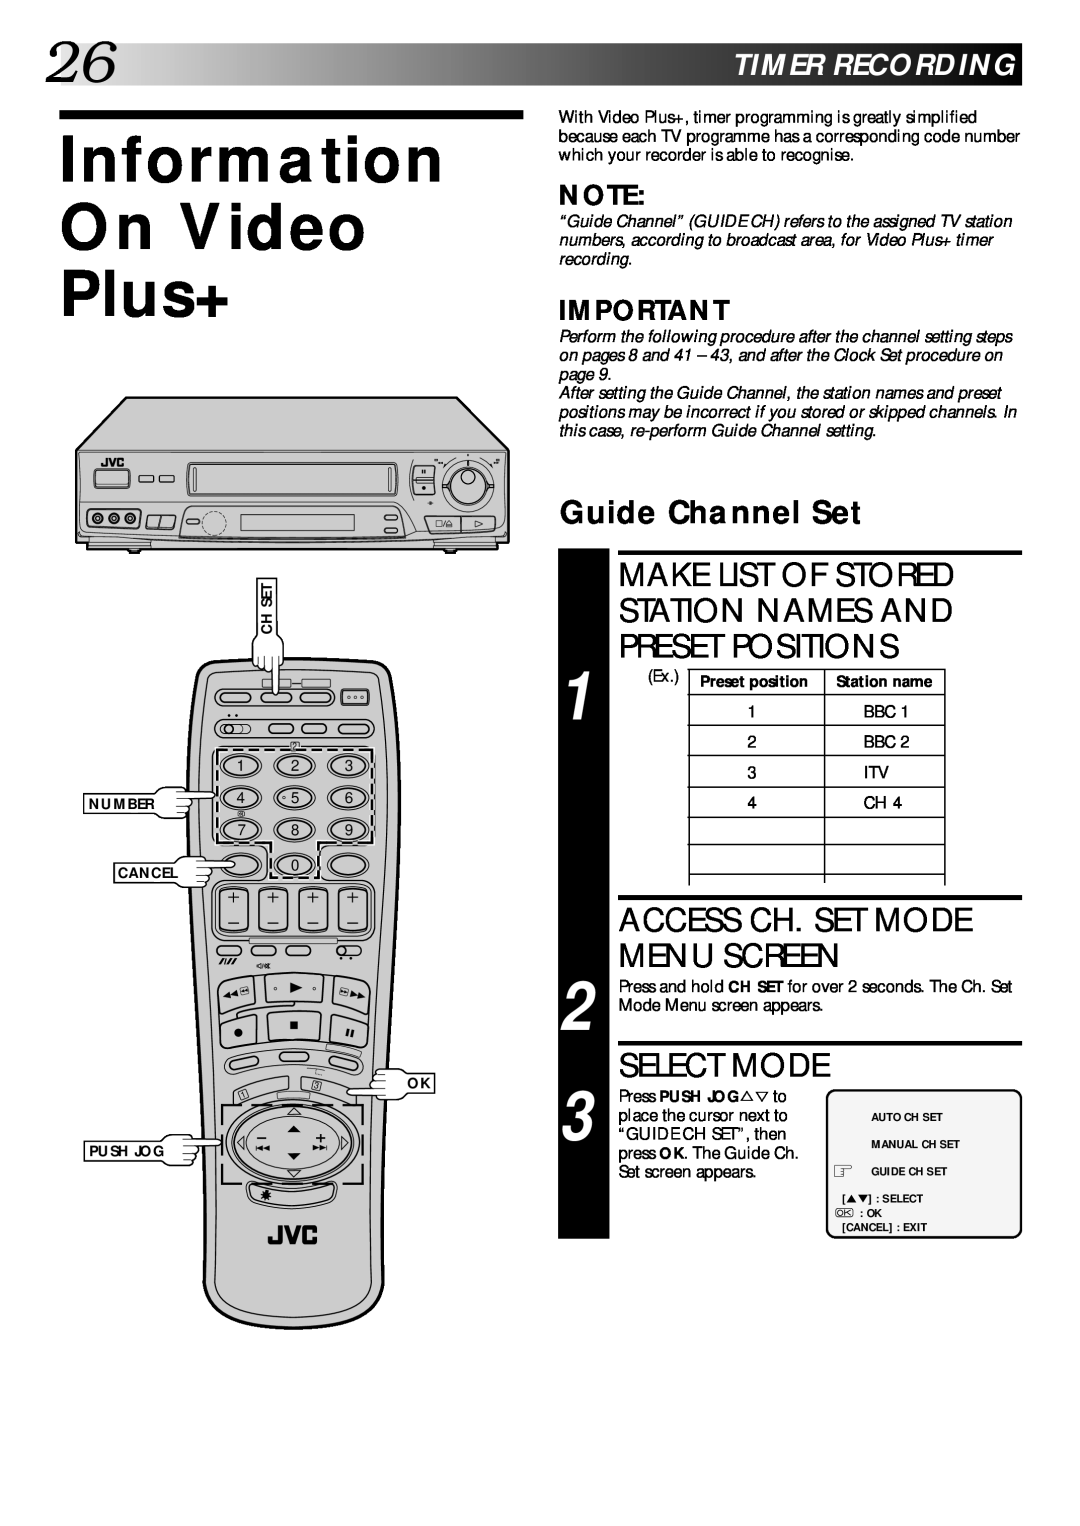 JVC PU30425 Information On Video Plus+, Make List Of Stored Station Names And Preset Positions, 26TIMERRECORDING 